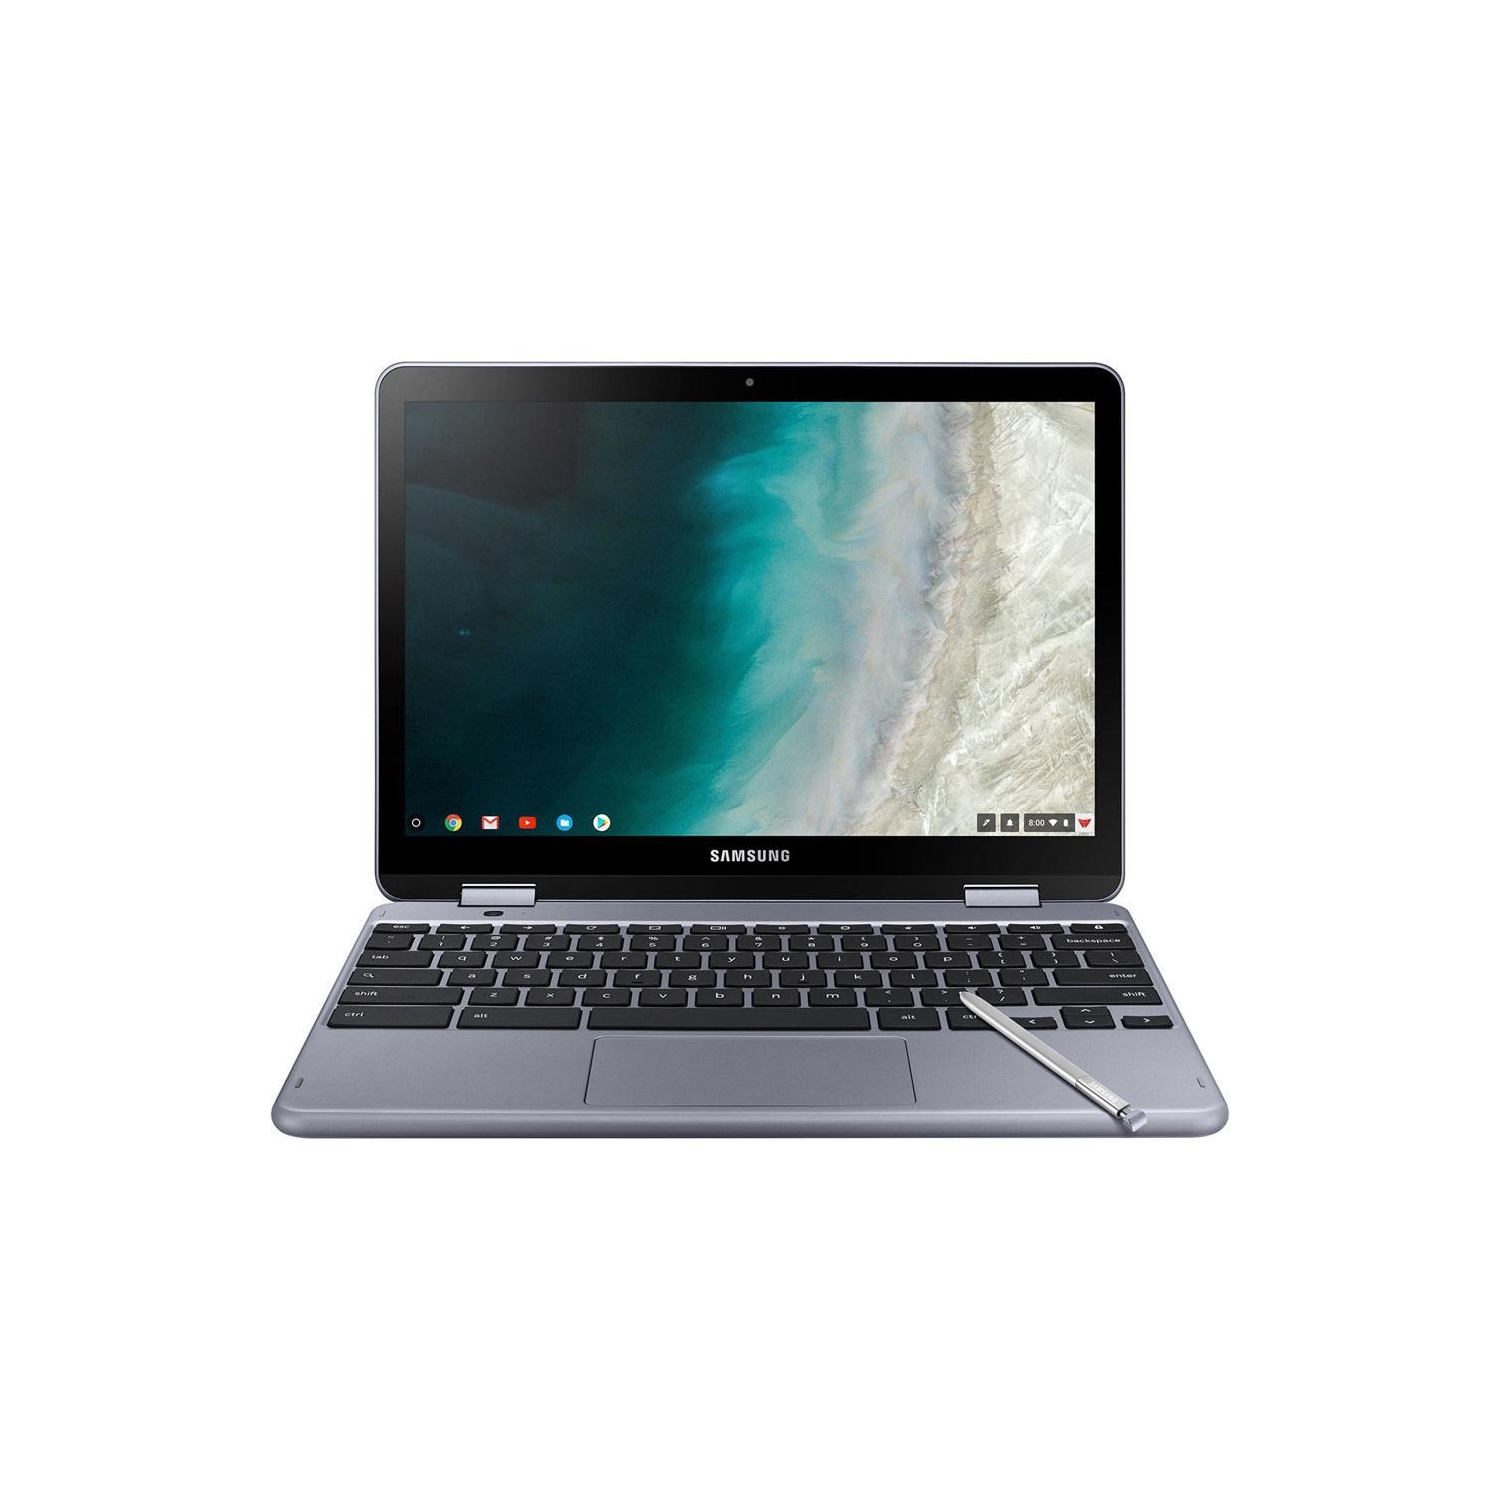 Samsung Chromebook Plus 12.2" Touchscreen 2-IN-1 Convertible with Pen Chrome OS